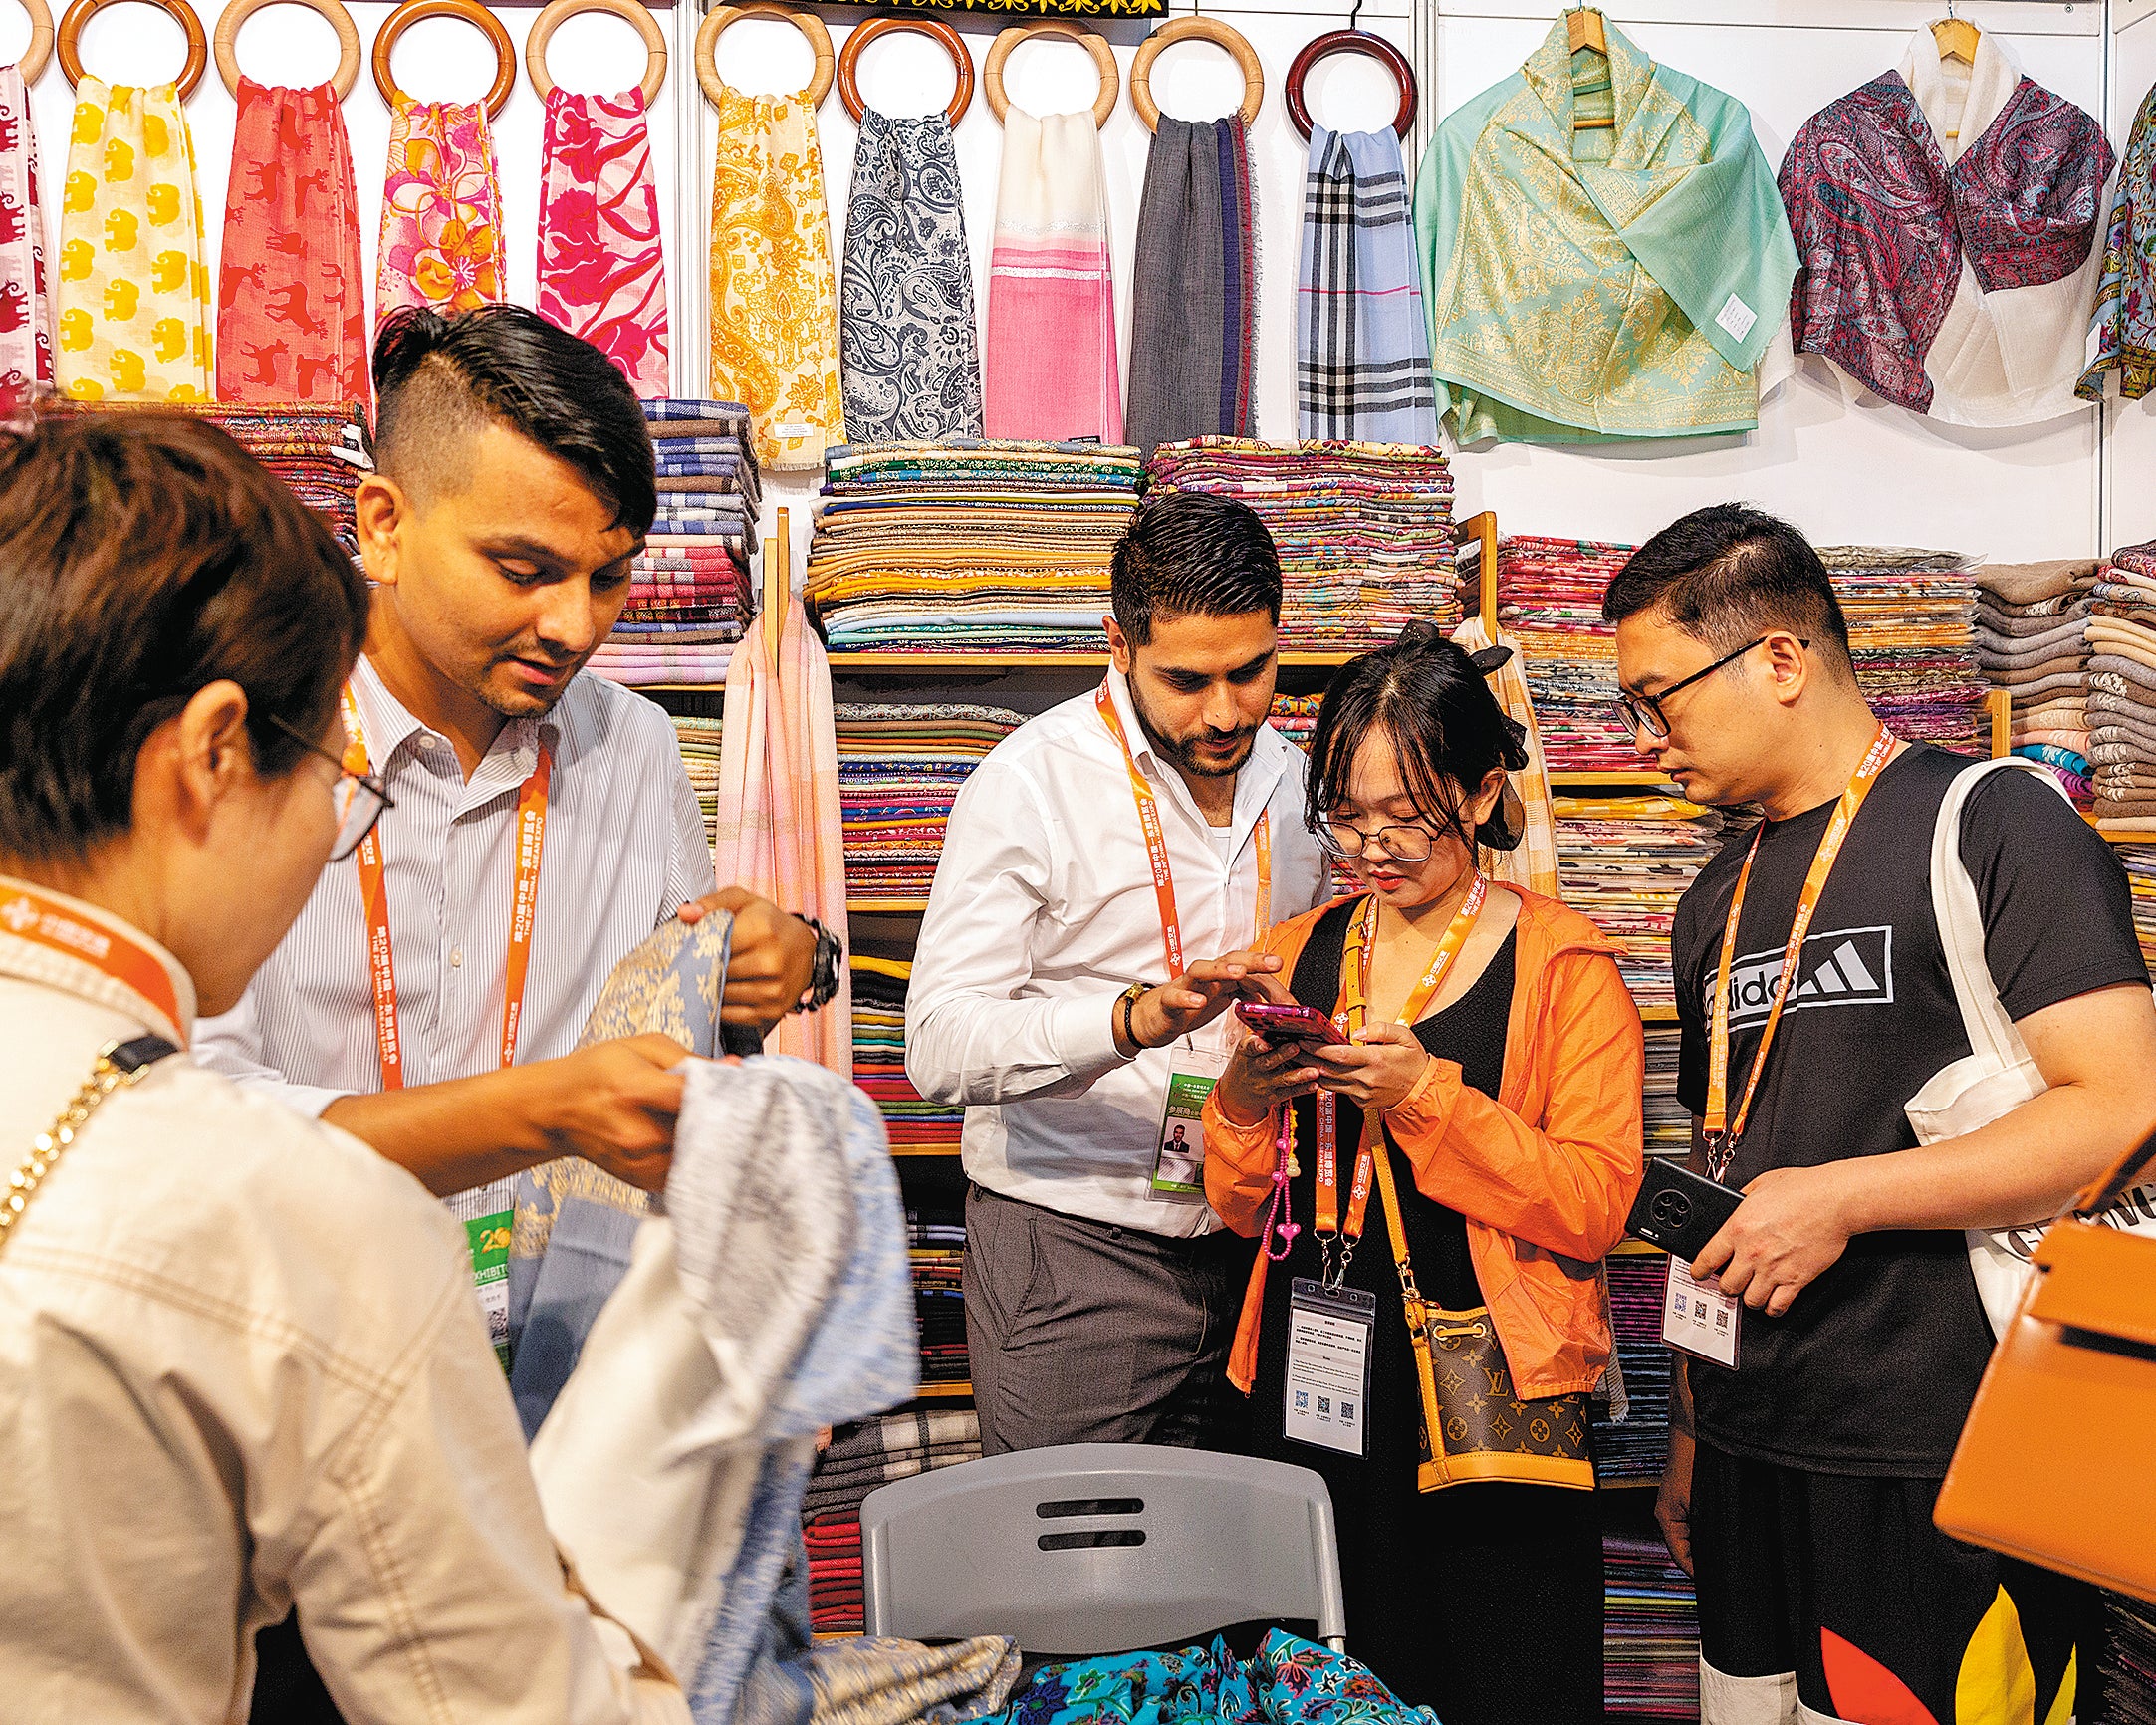 Visitors purchase cashmere products through mobile payment methods in Nanning, Guangxi Zhuang autonomous region